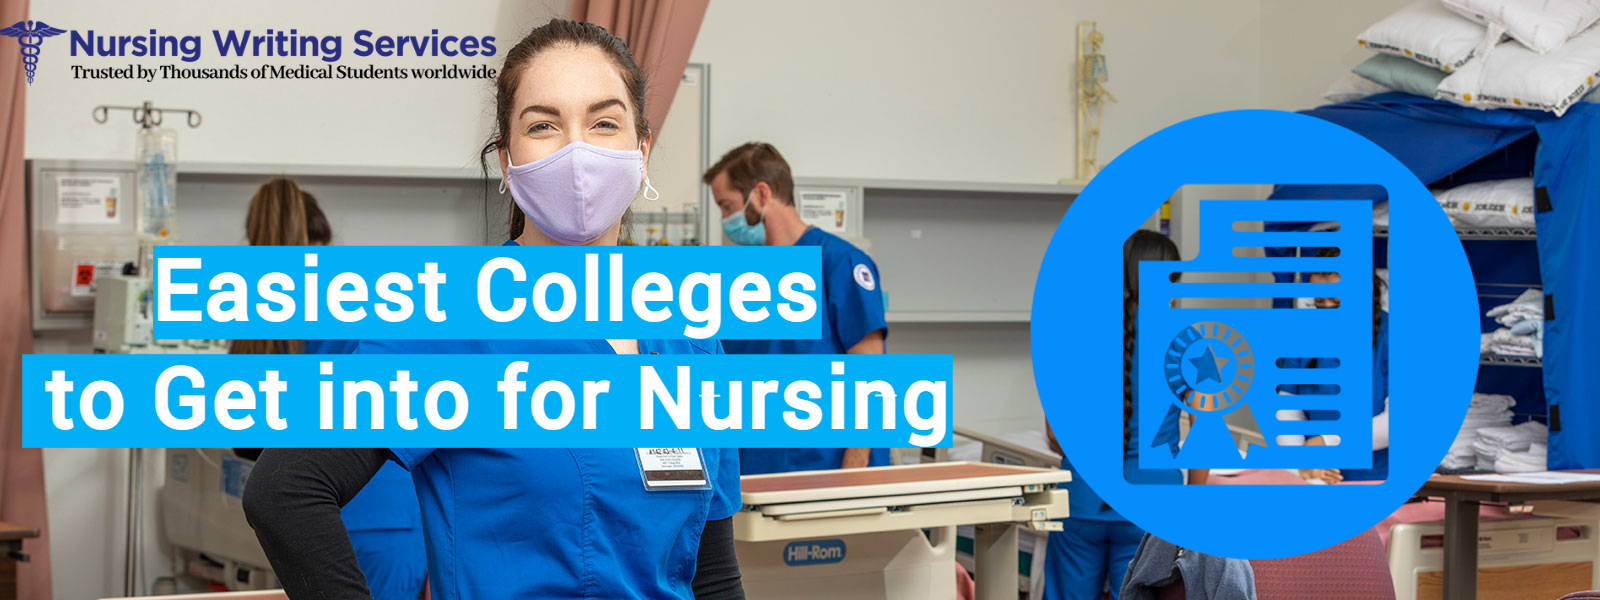 Easiest Colleges to Get into for Nursing